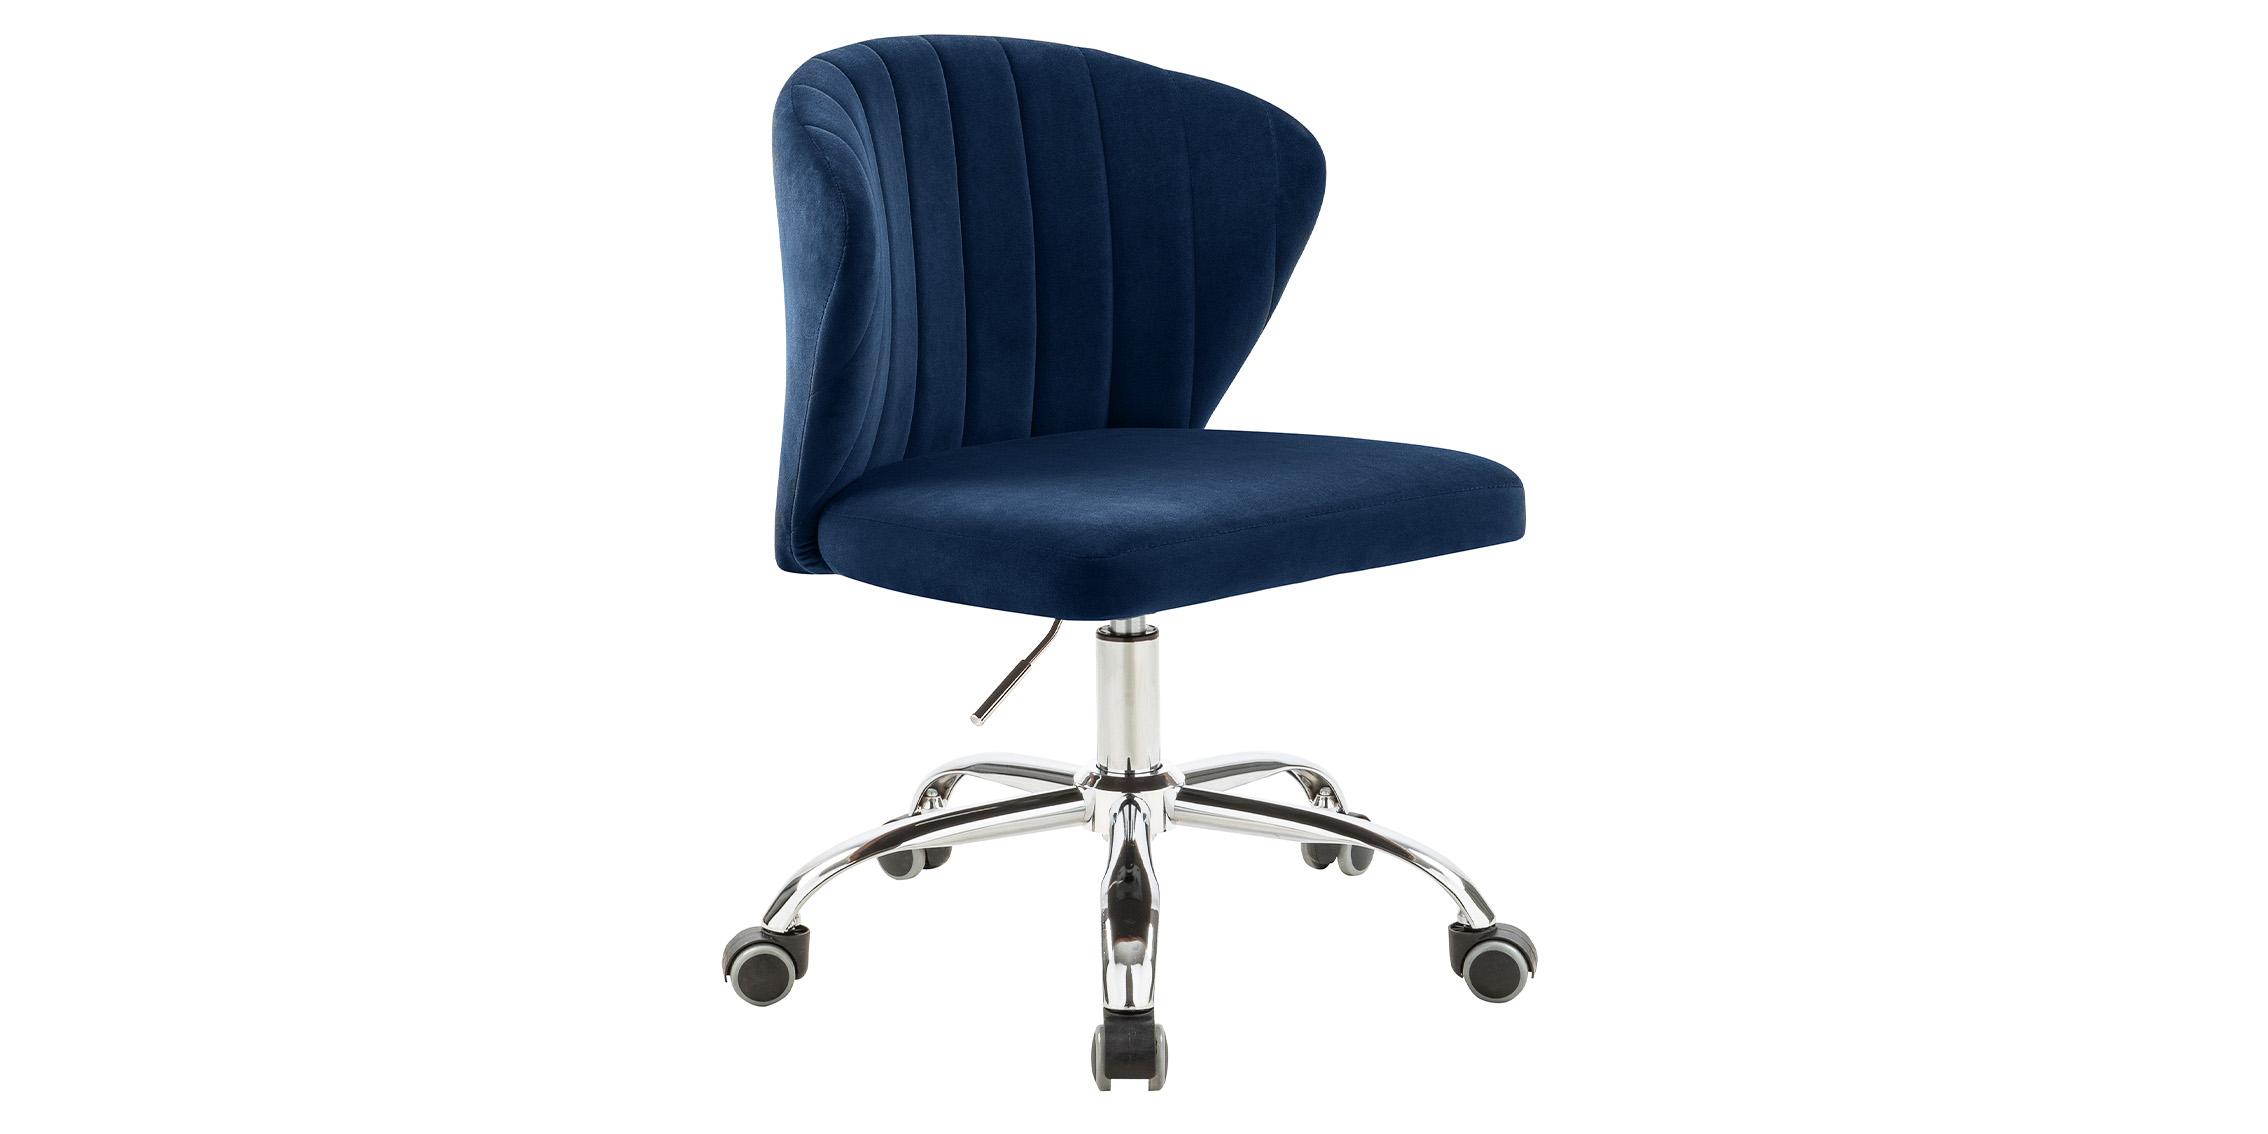 Contemporary, Modern Office Chair FINLEY 166Navy 166Navy in Chrome, Navy Fabric